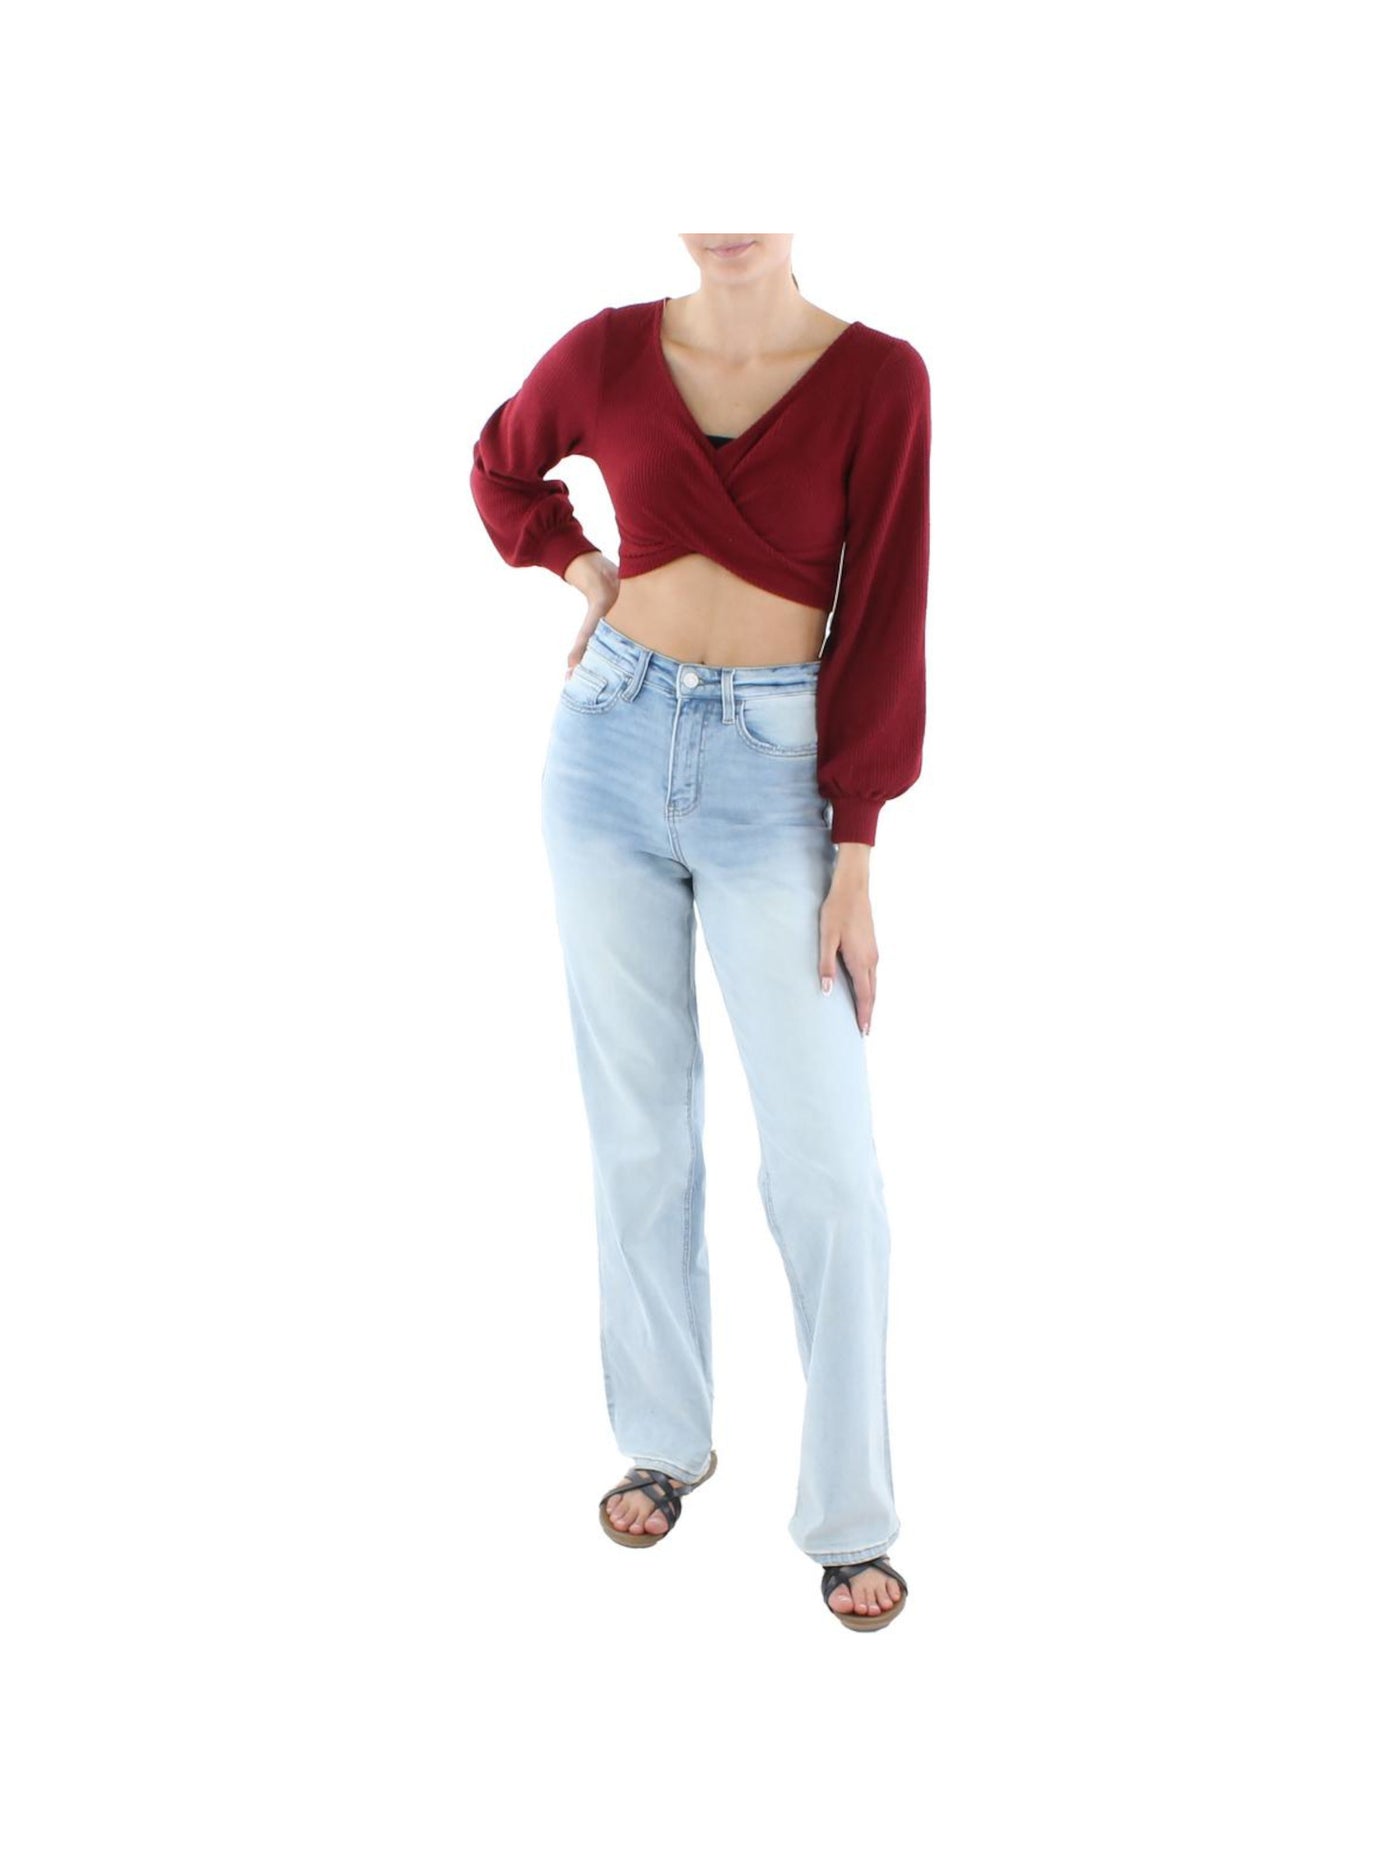 ALMOST FAMOUS Womens Maroon Ribbed Twist Front Long Sleeve V Neck Crop Top Juniors M